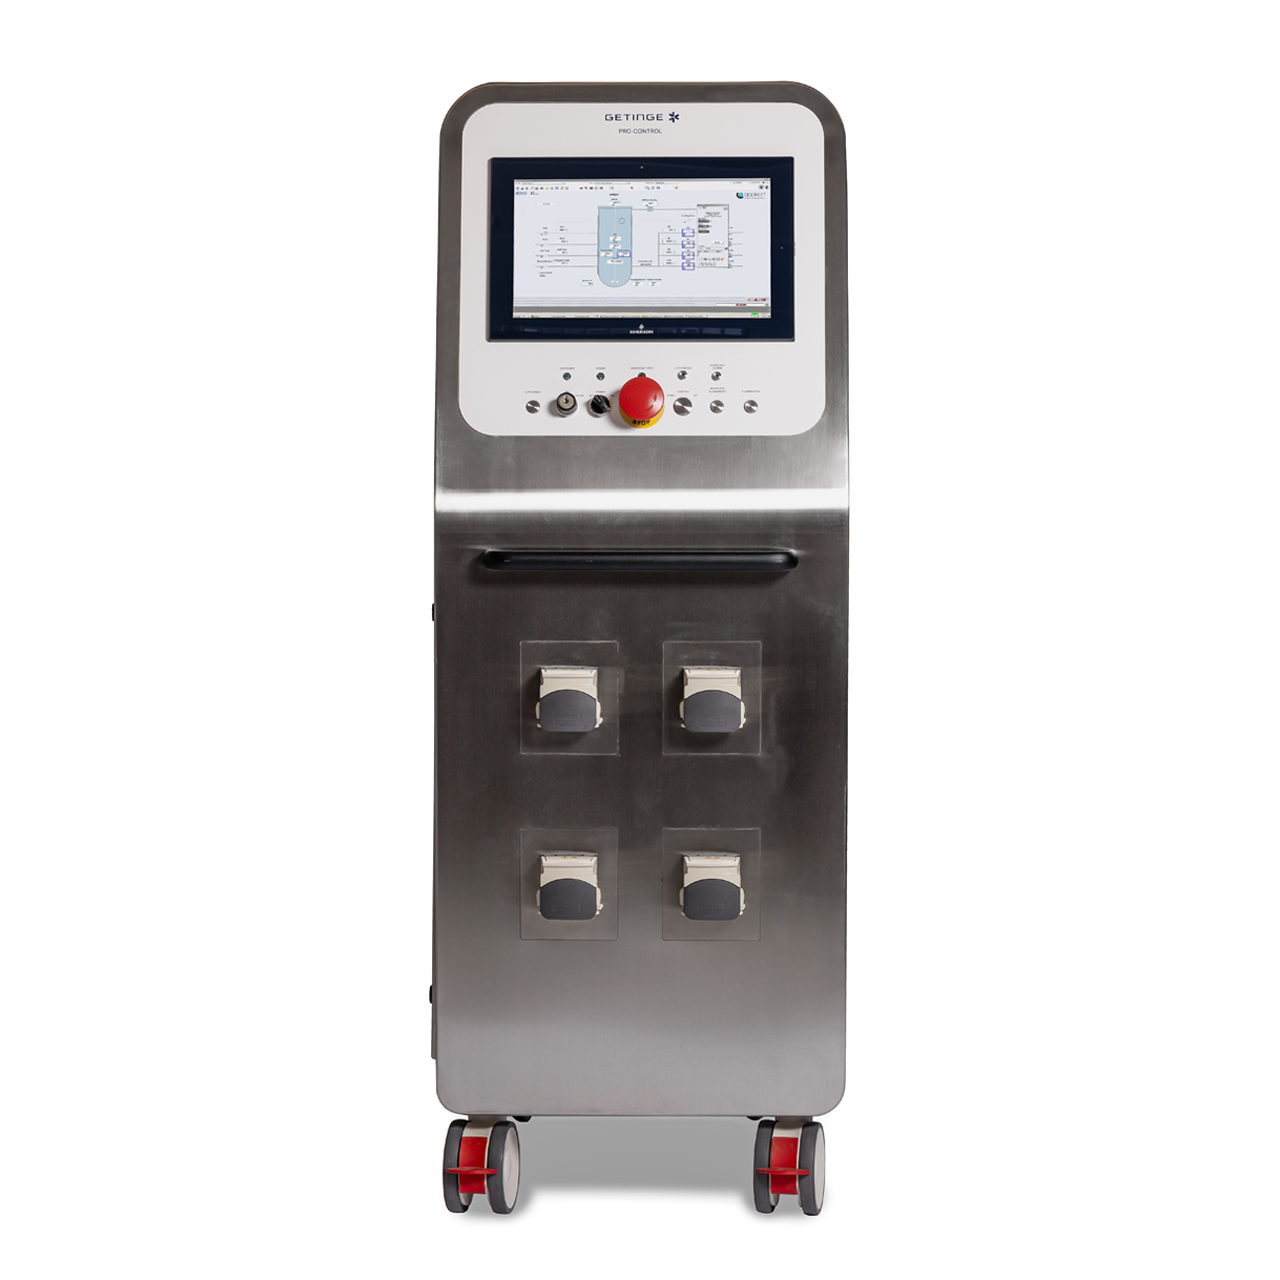 The Pro-Control is a controller designed to work with pilot and production scale bioprocessing systems